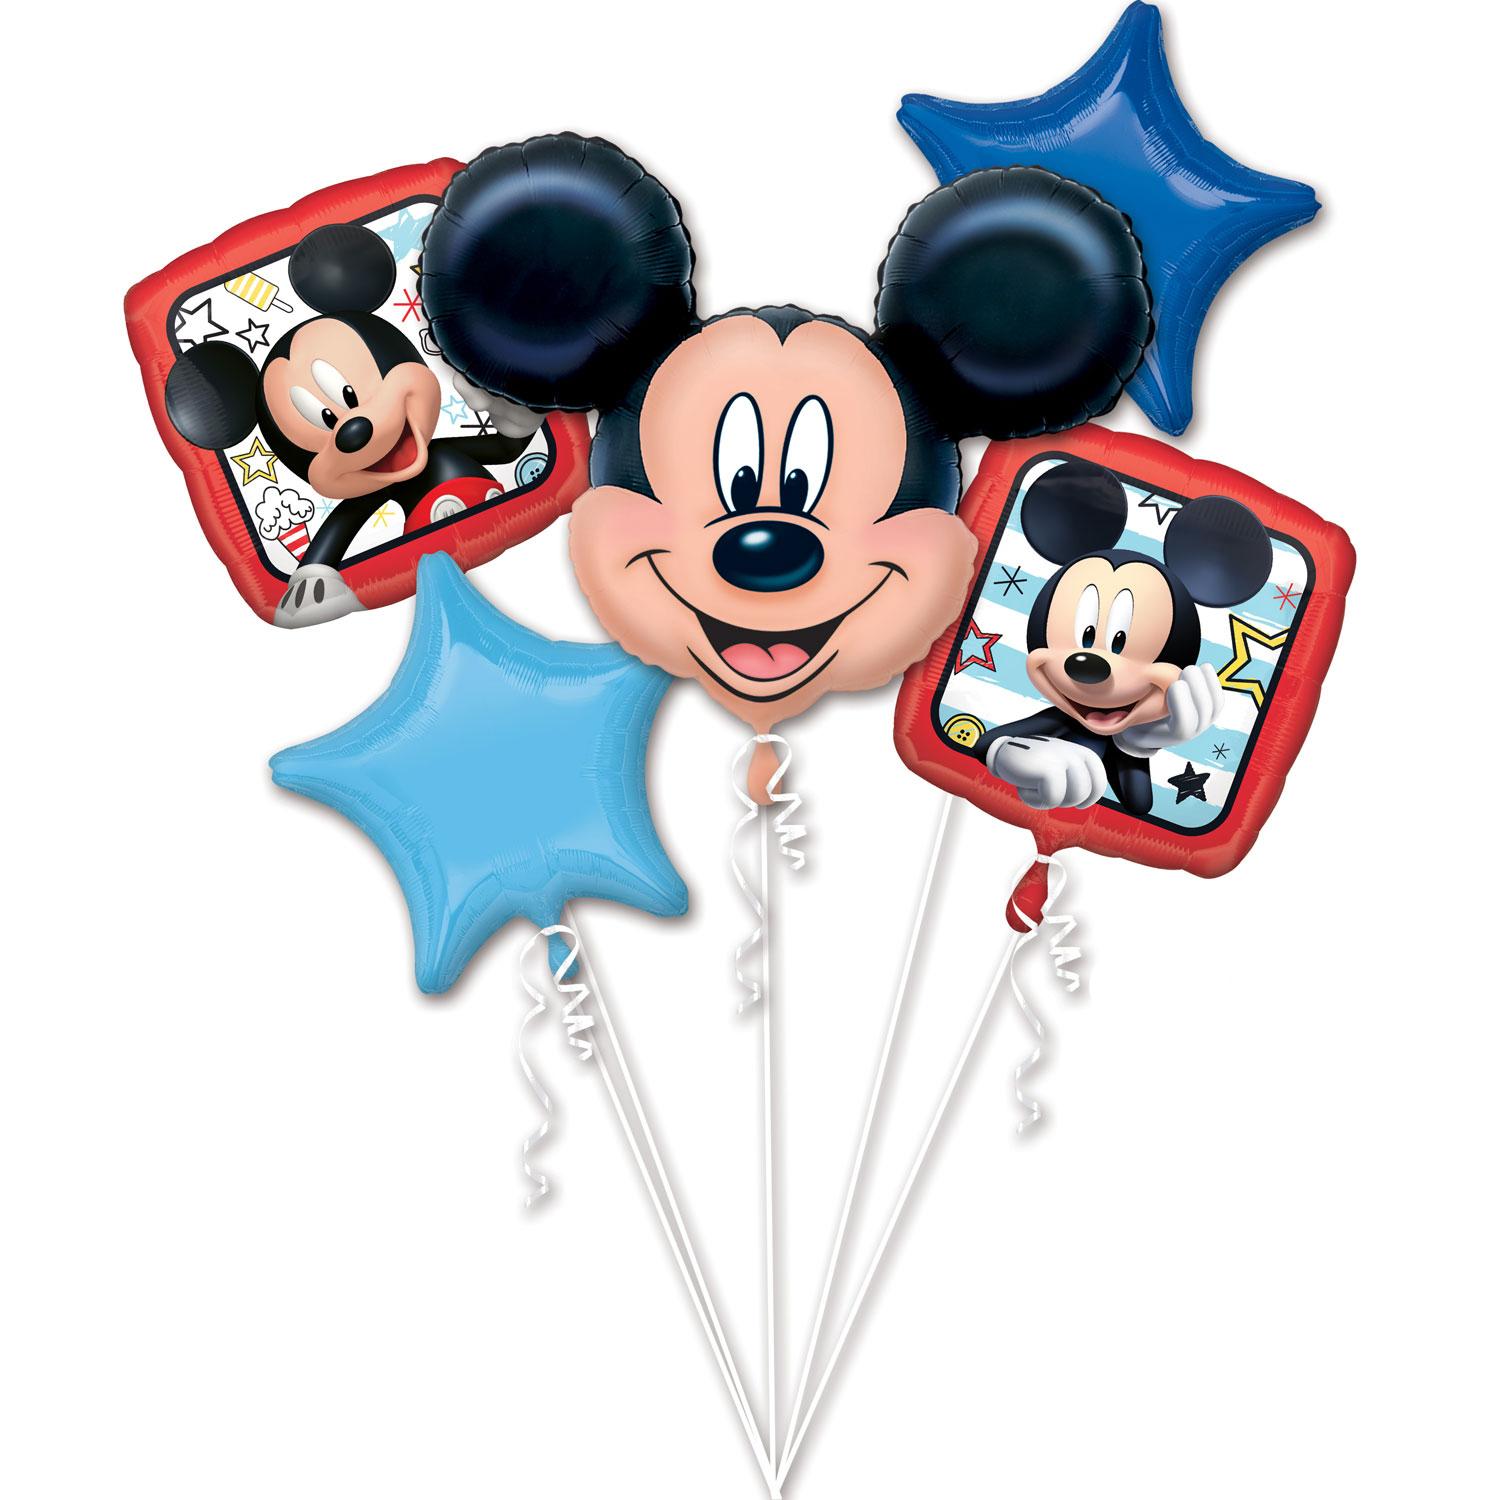 Mickey Roadster Racers Balloon Bouquet 5pcs Balloons & Streamers - Party Centre